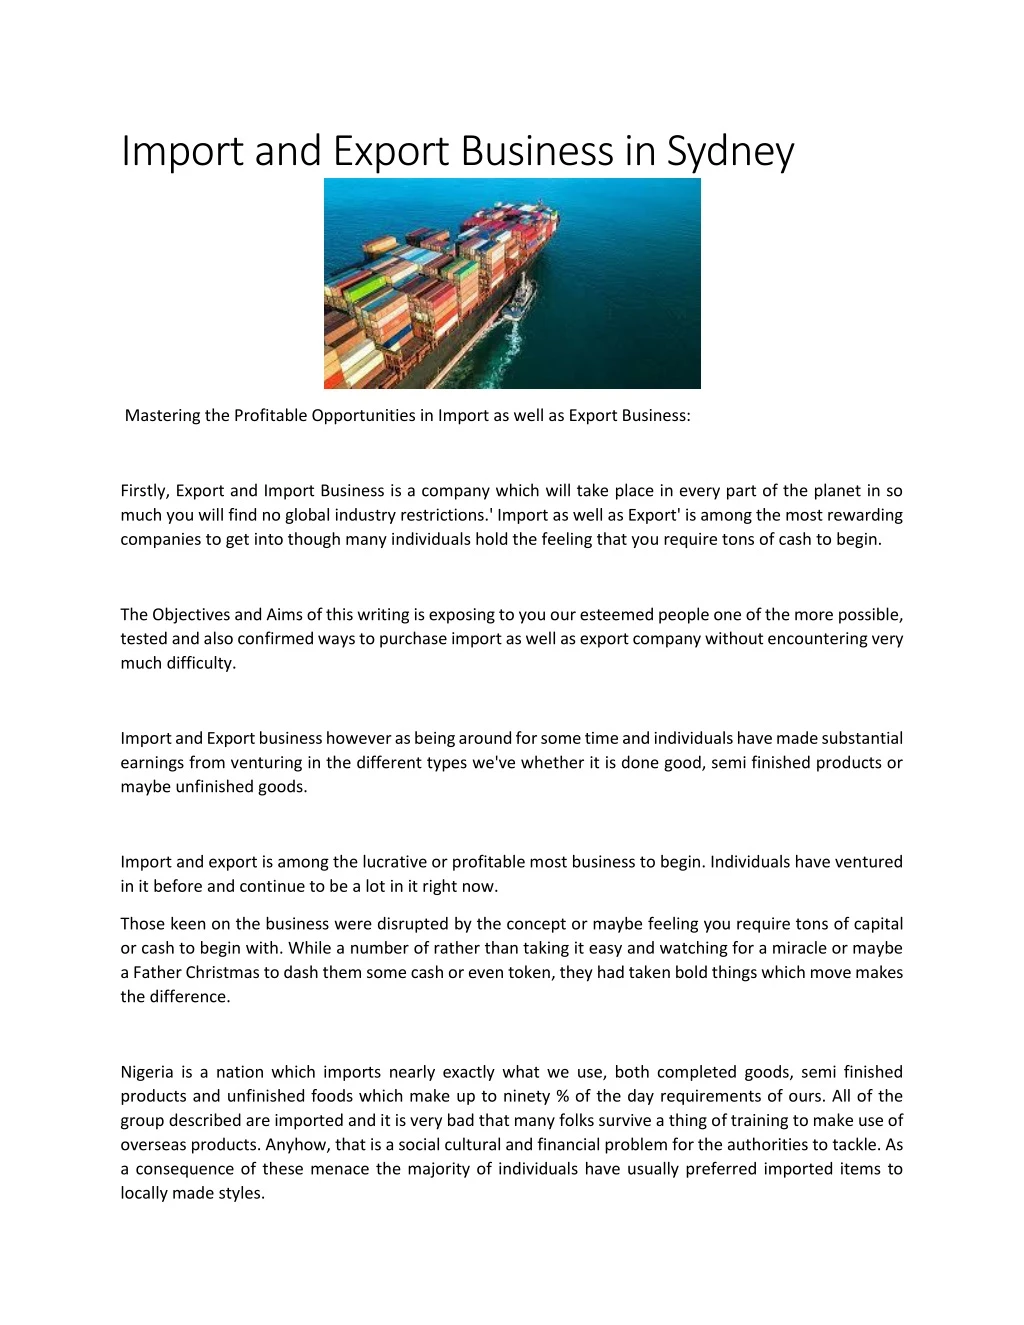 import and export business in sydney